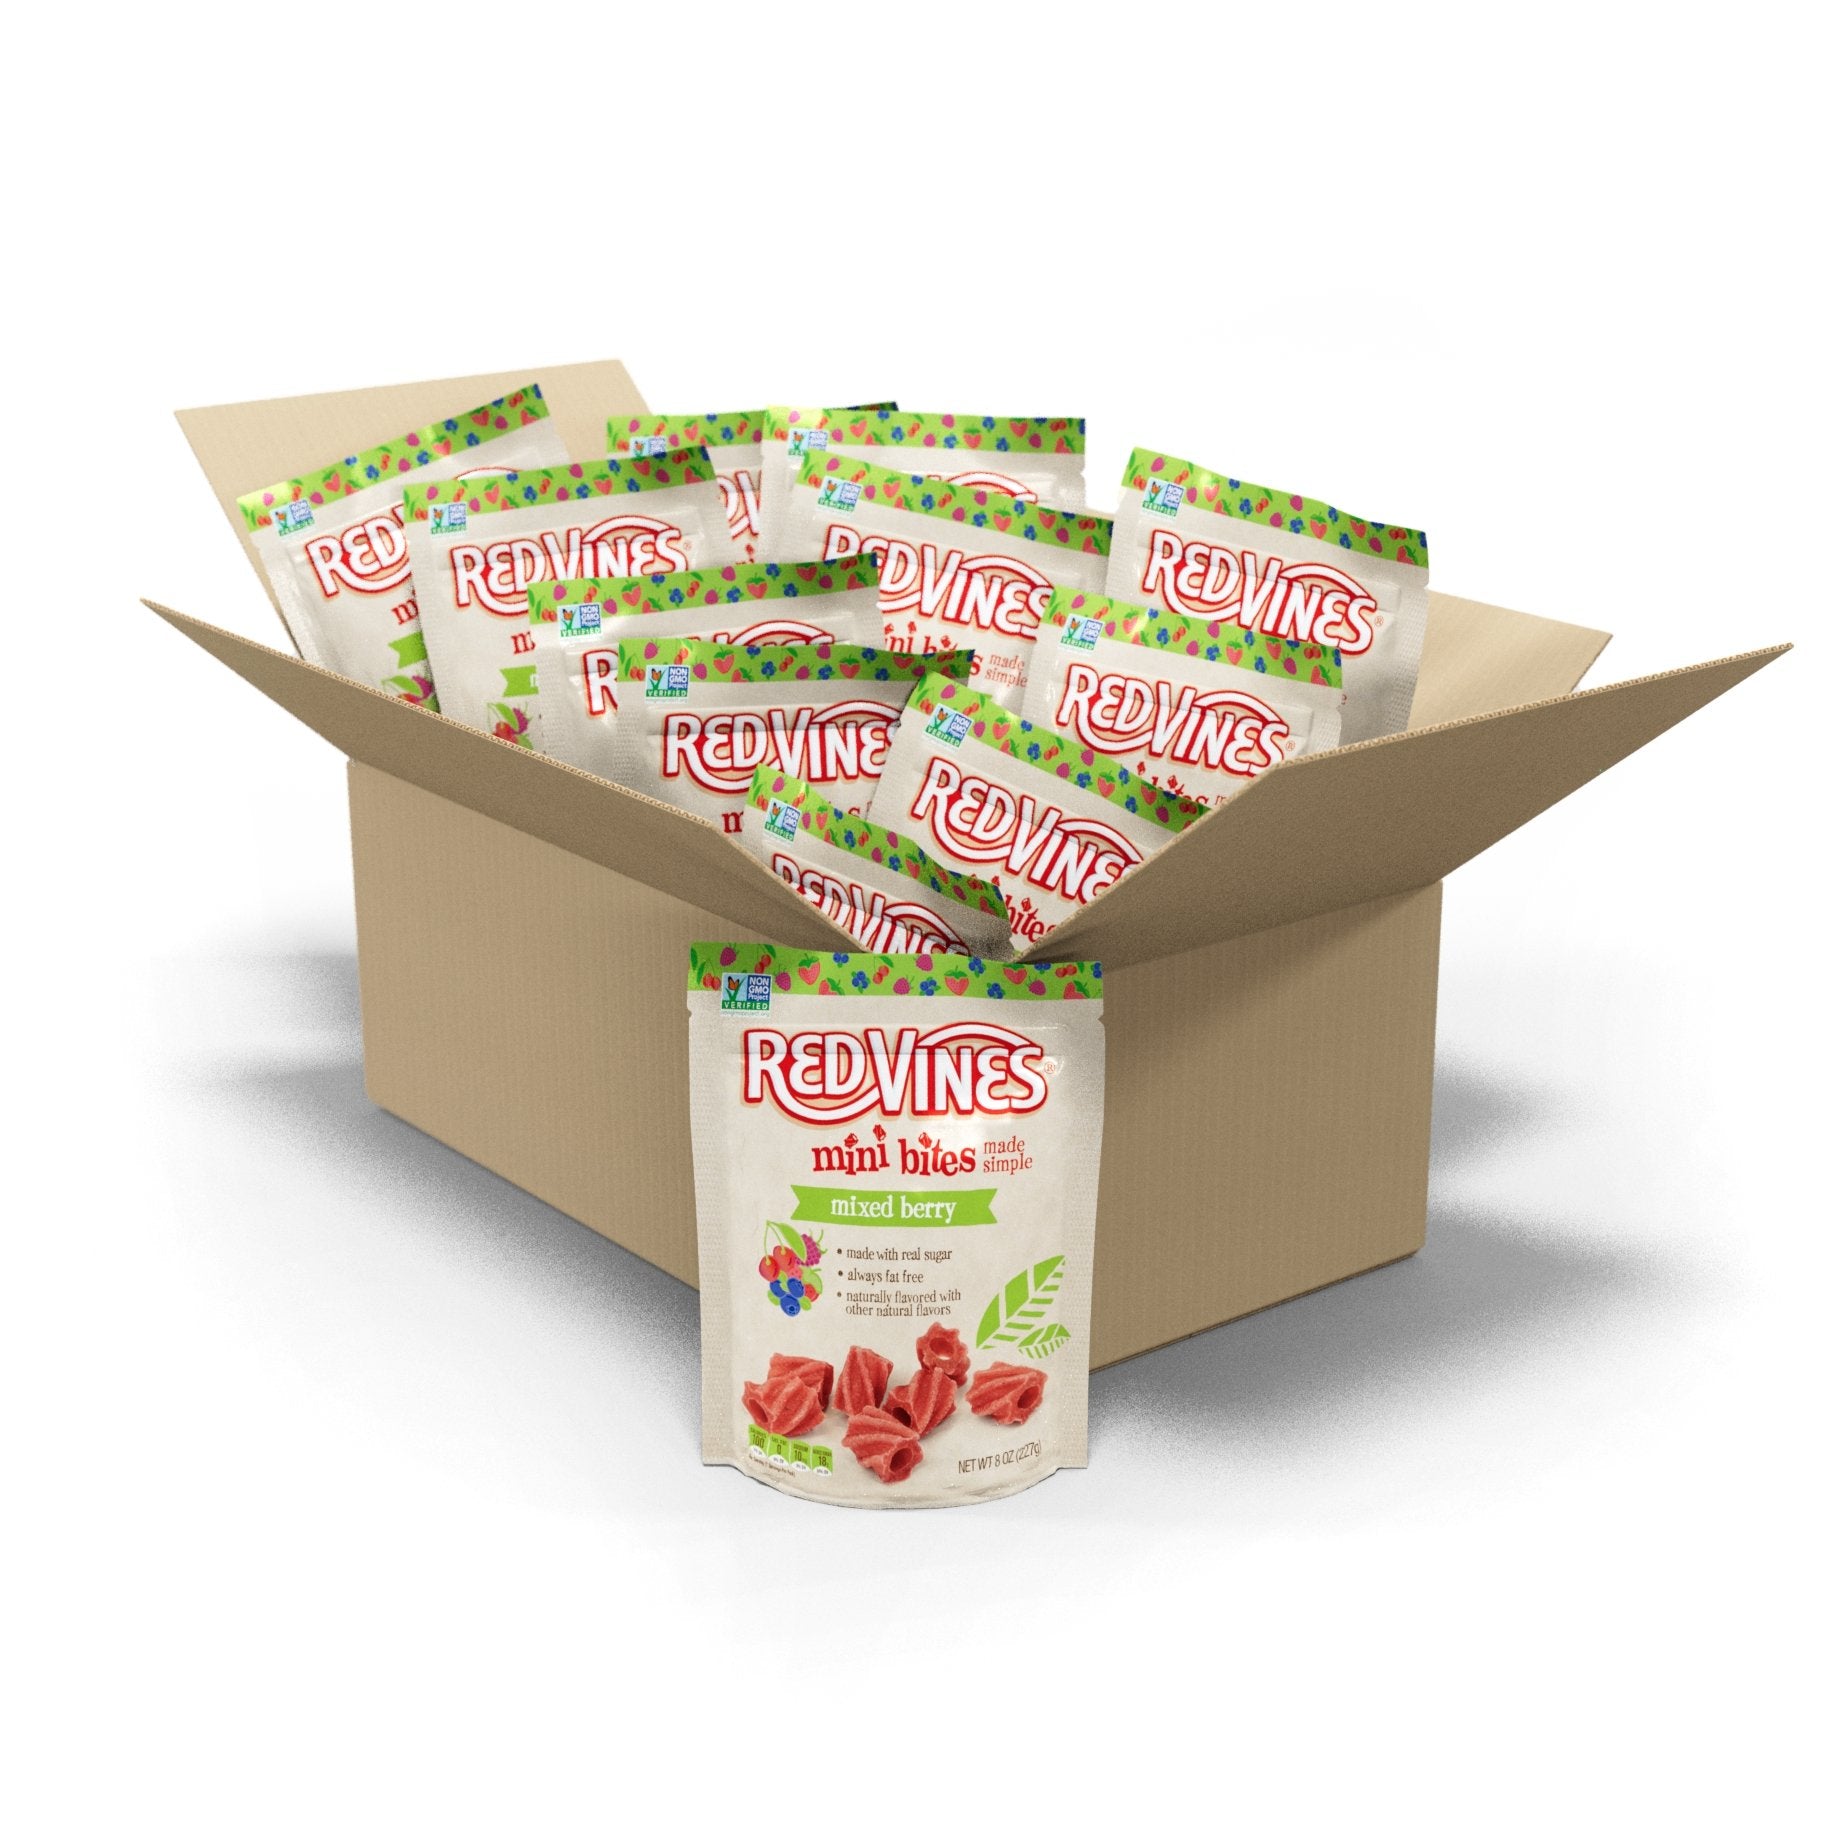 12 count box of RED VINES Made Simple Mixed Berry Bites 8oz Bags